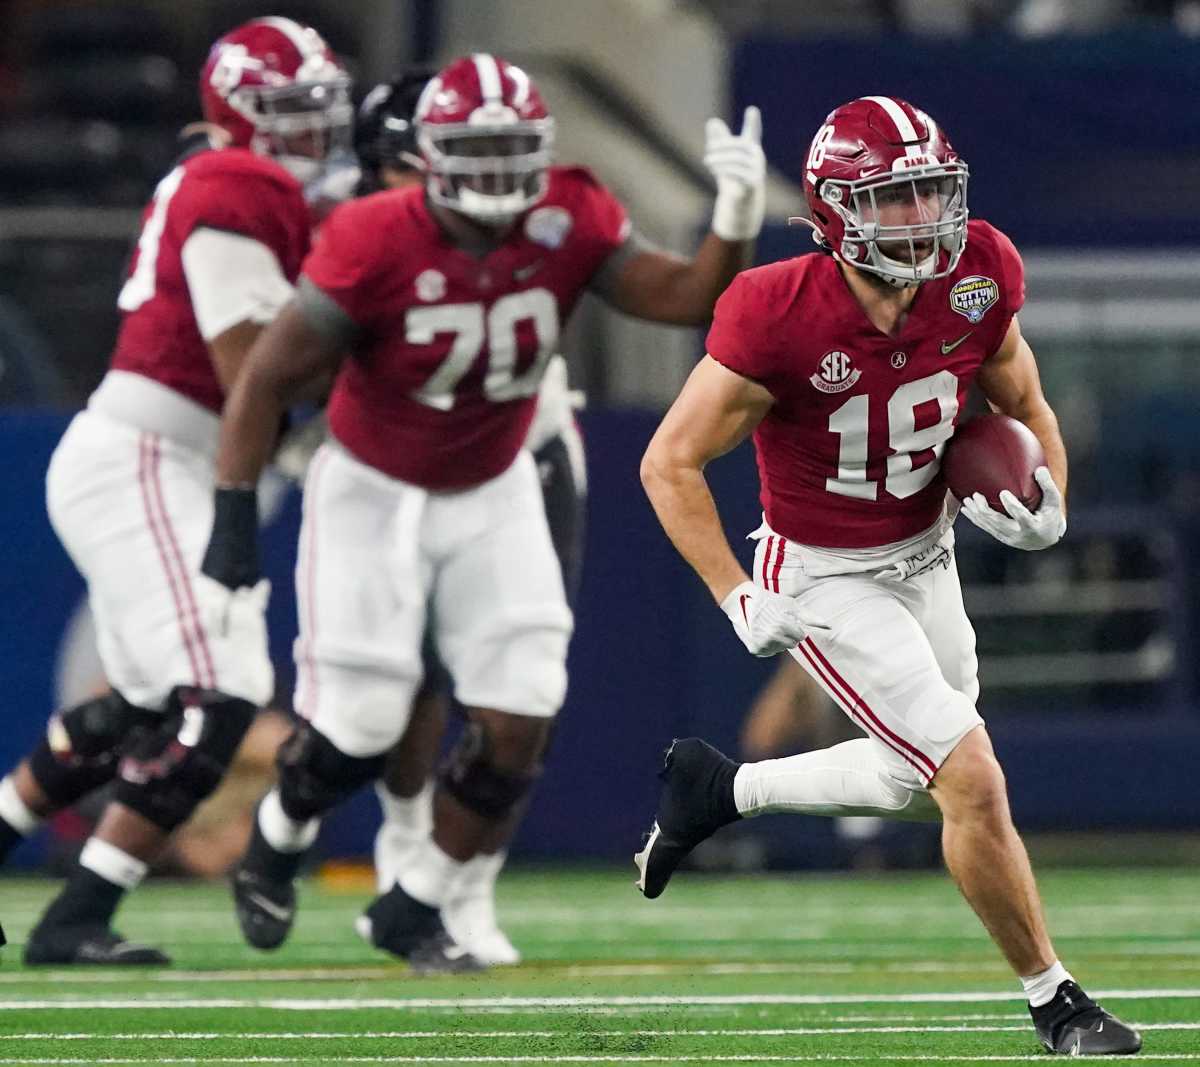 Alabama wide receiver Slade Bolden (18) carries the ball against Cincinnati in the 2021 College Football Playoff Semifinal game at the 86th Cotton Bowl in AT&T Stadium in Arlington, Texas Friday, Dec. 31, 2021.